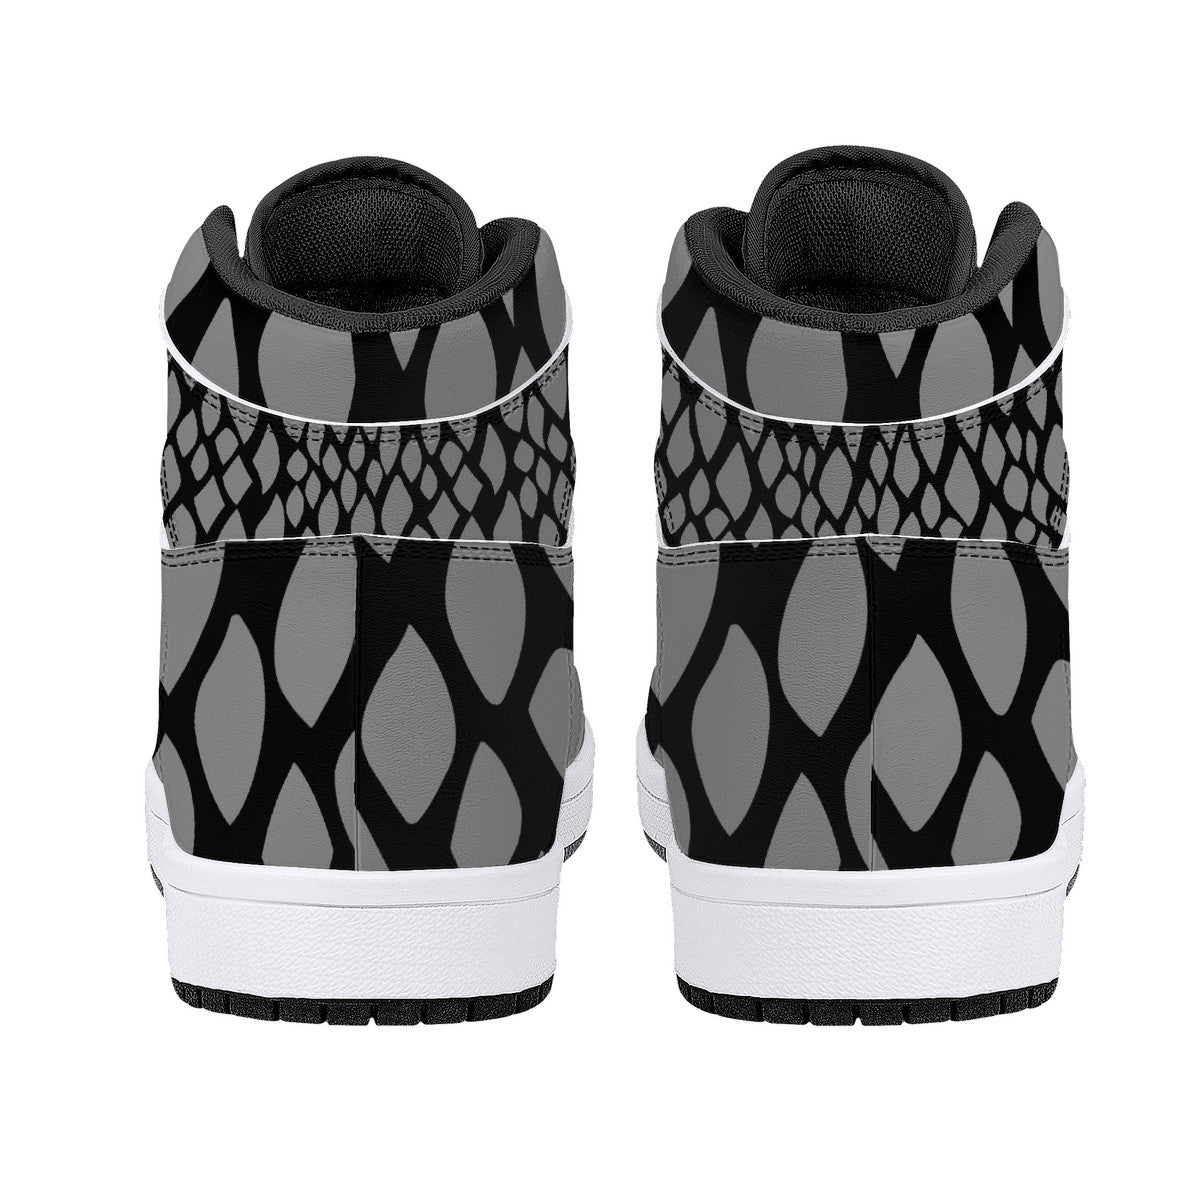 "Mono Snake" High-Top Synthetic Leather Sneakers